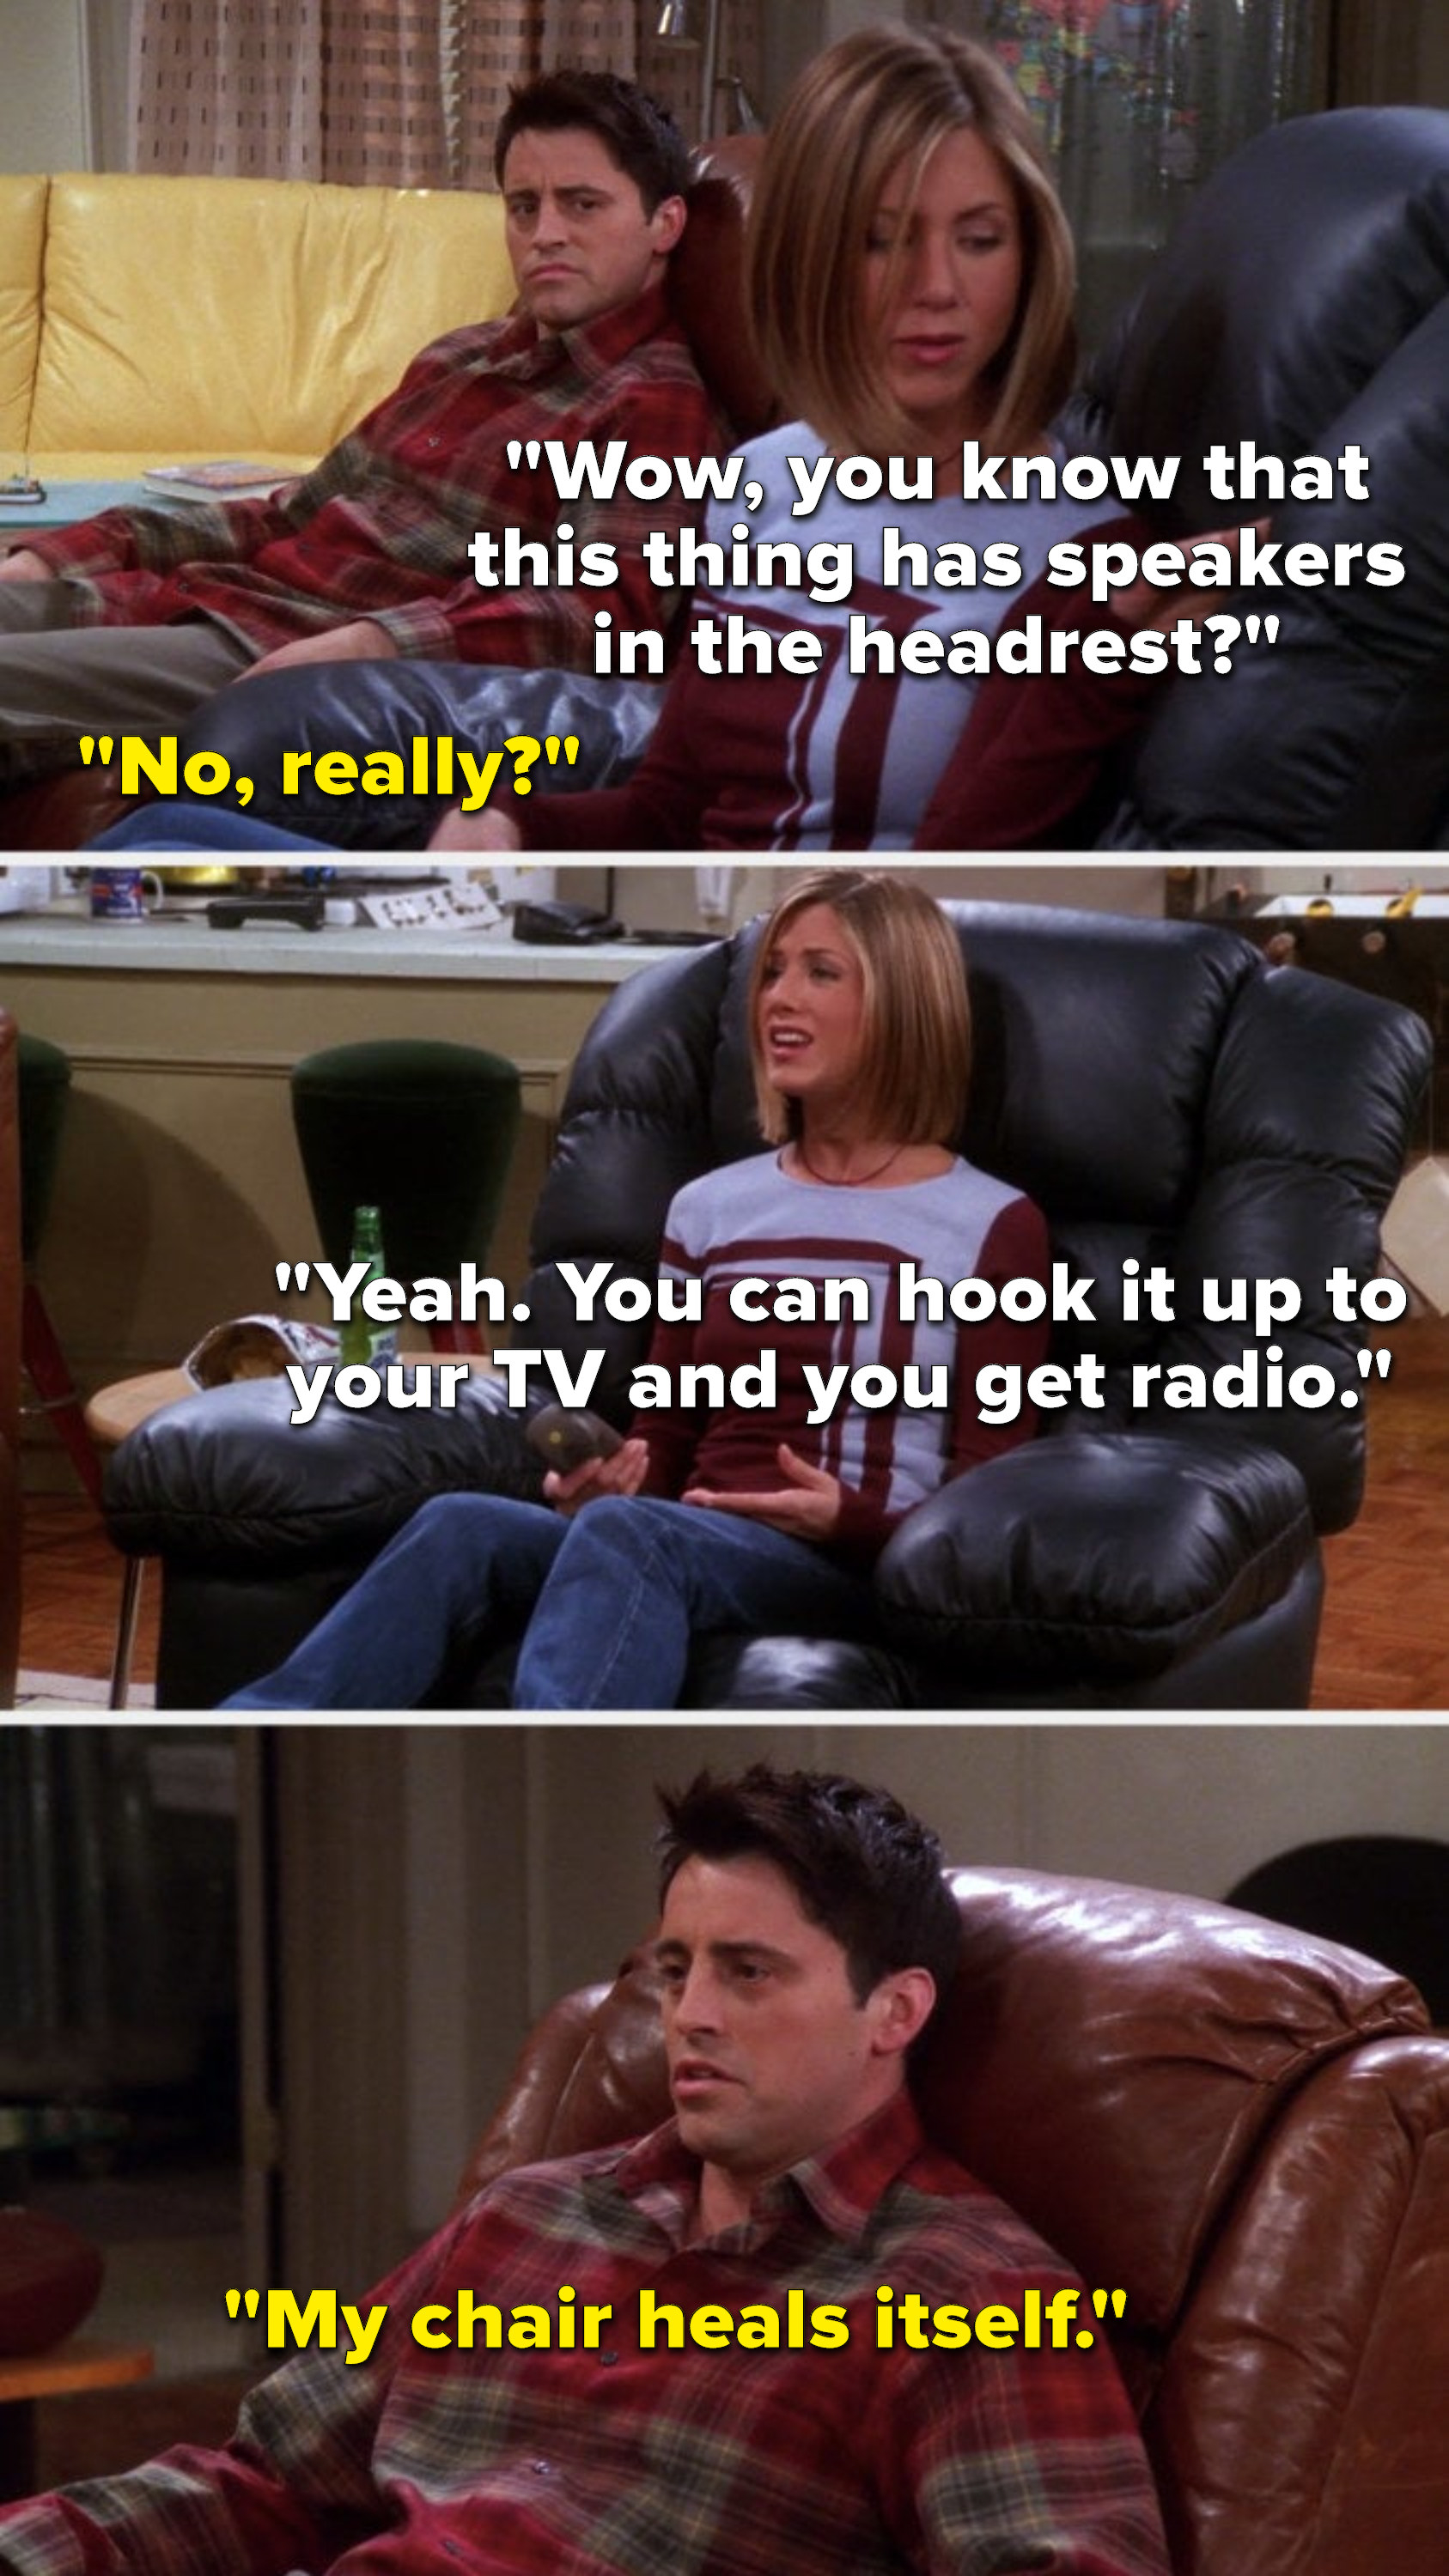 Rachel is sitting in an armchair and says, Wow, you know that this thing has speakers in the headrest; Joey says, No really; Rachel says, Yeah, You can hook it up to your TV and you get radio; Joey says, My chair heals itself